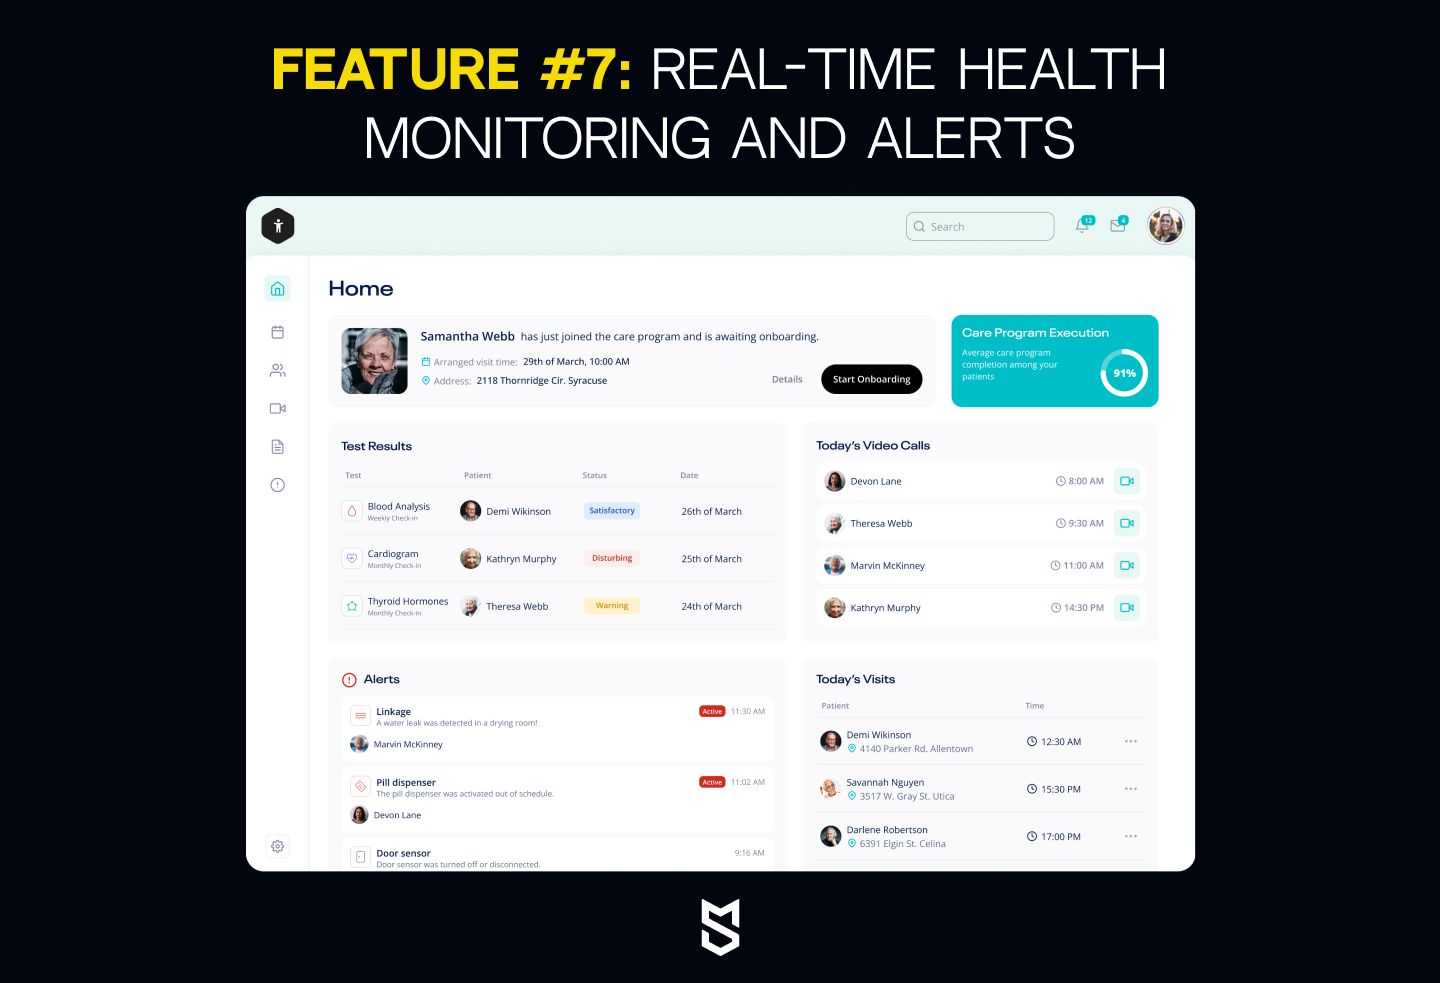 Feature #7: Real-time health monitoring and alerts